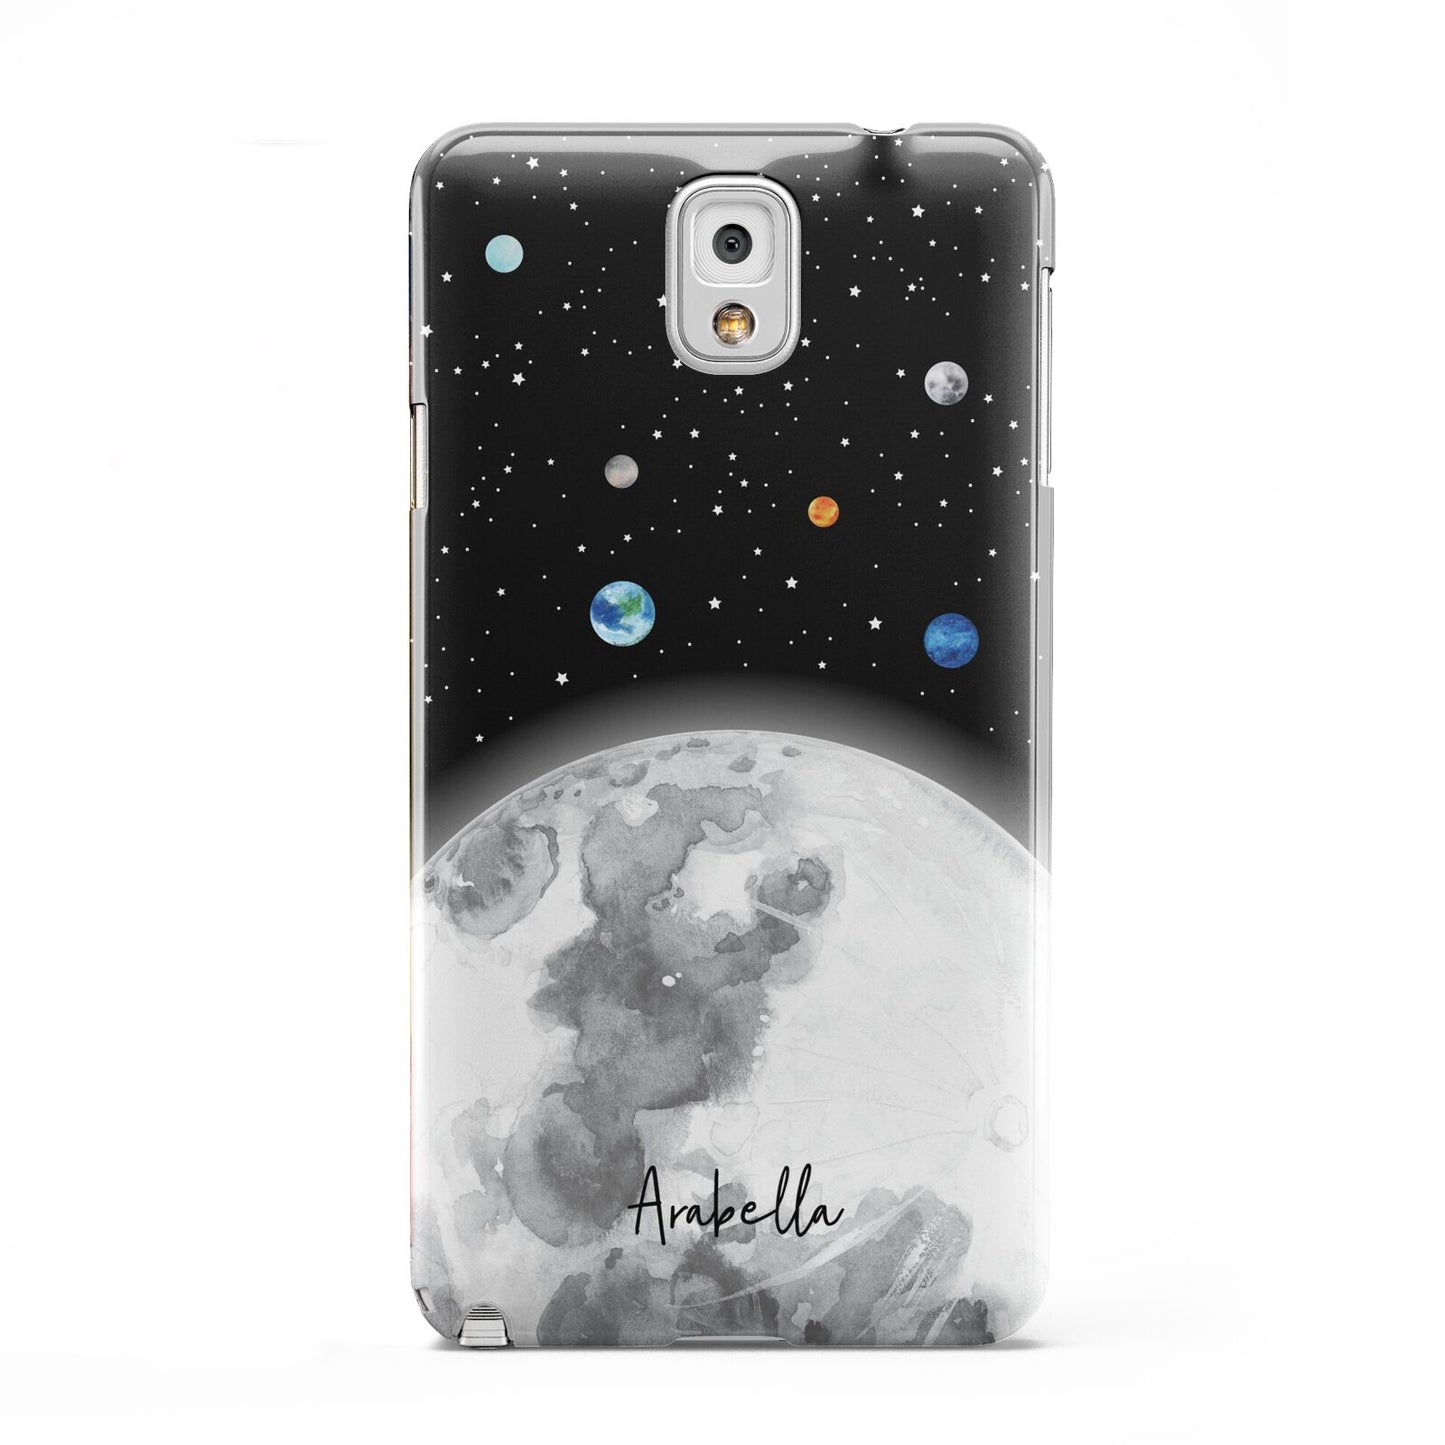 Watercolour Close up Moon with Name Samsung Galaxy Note 3 Case